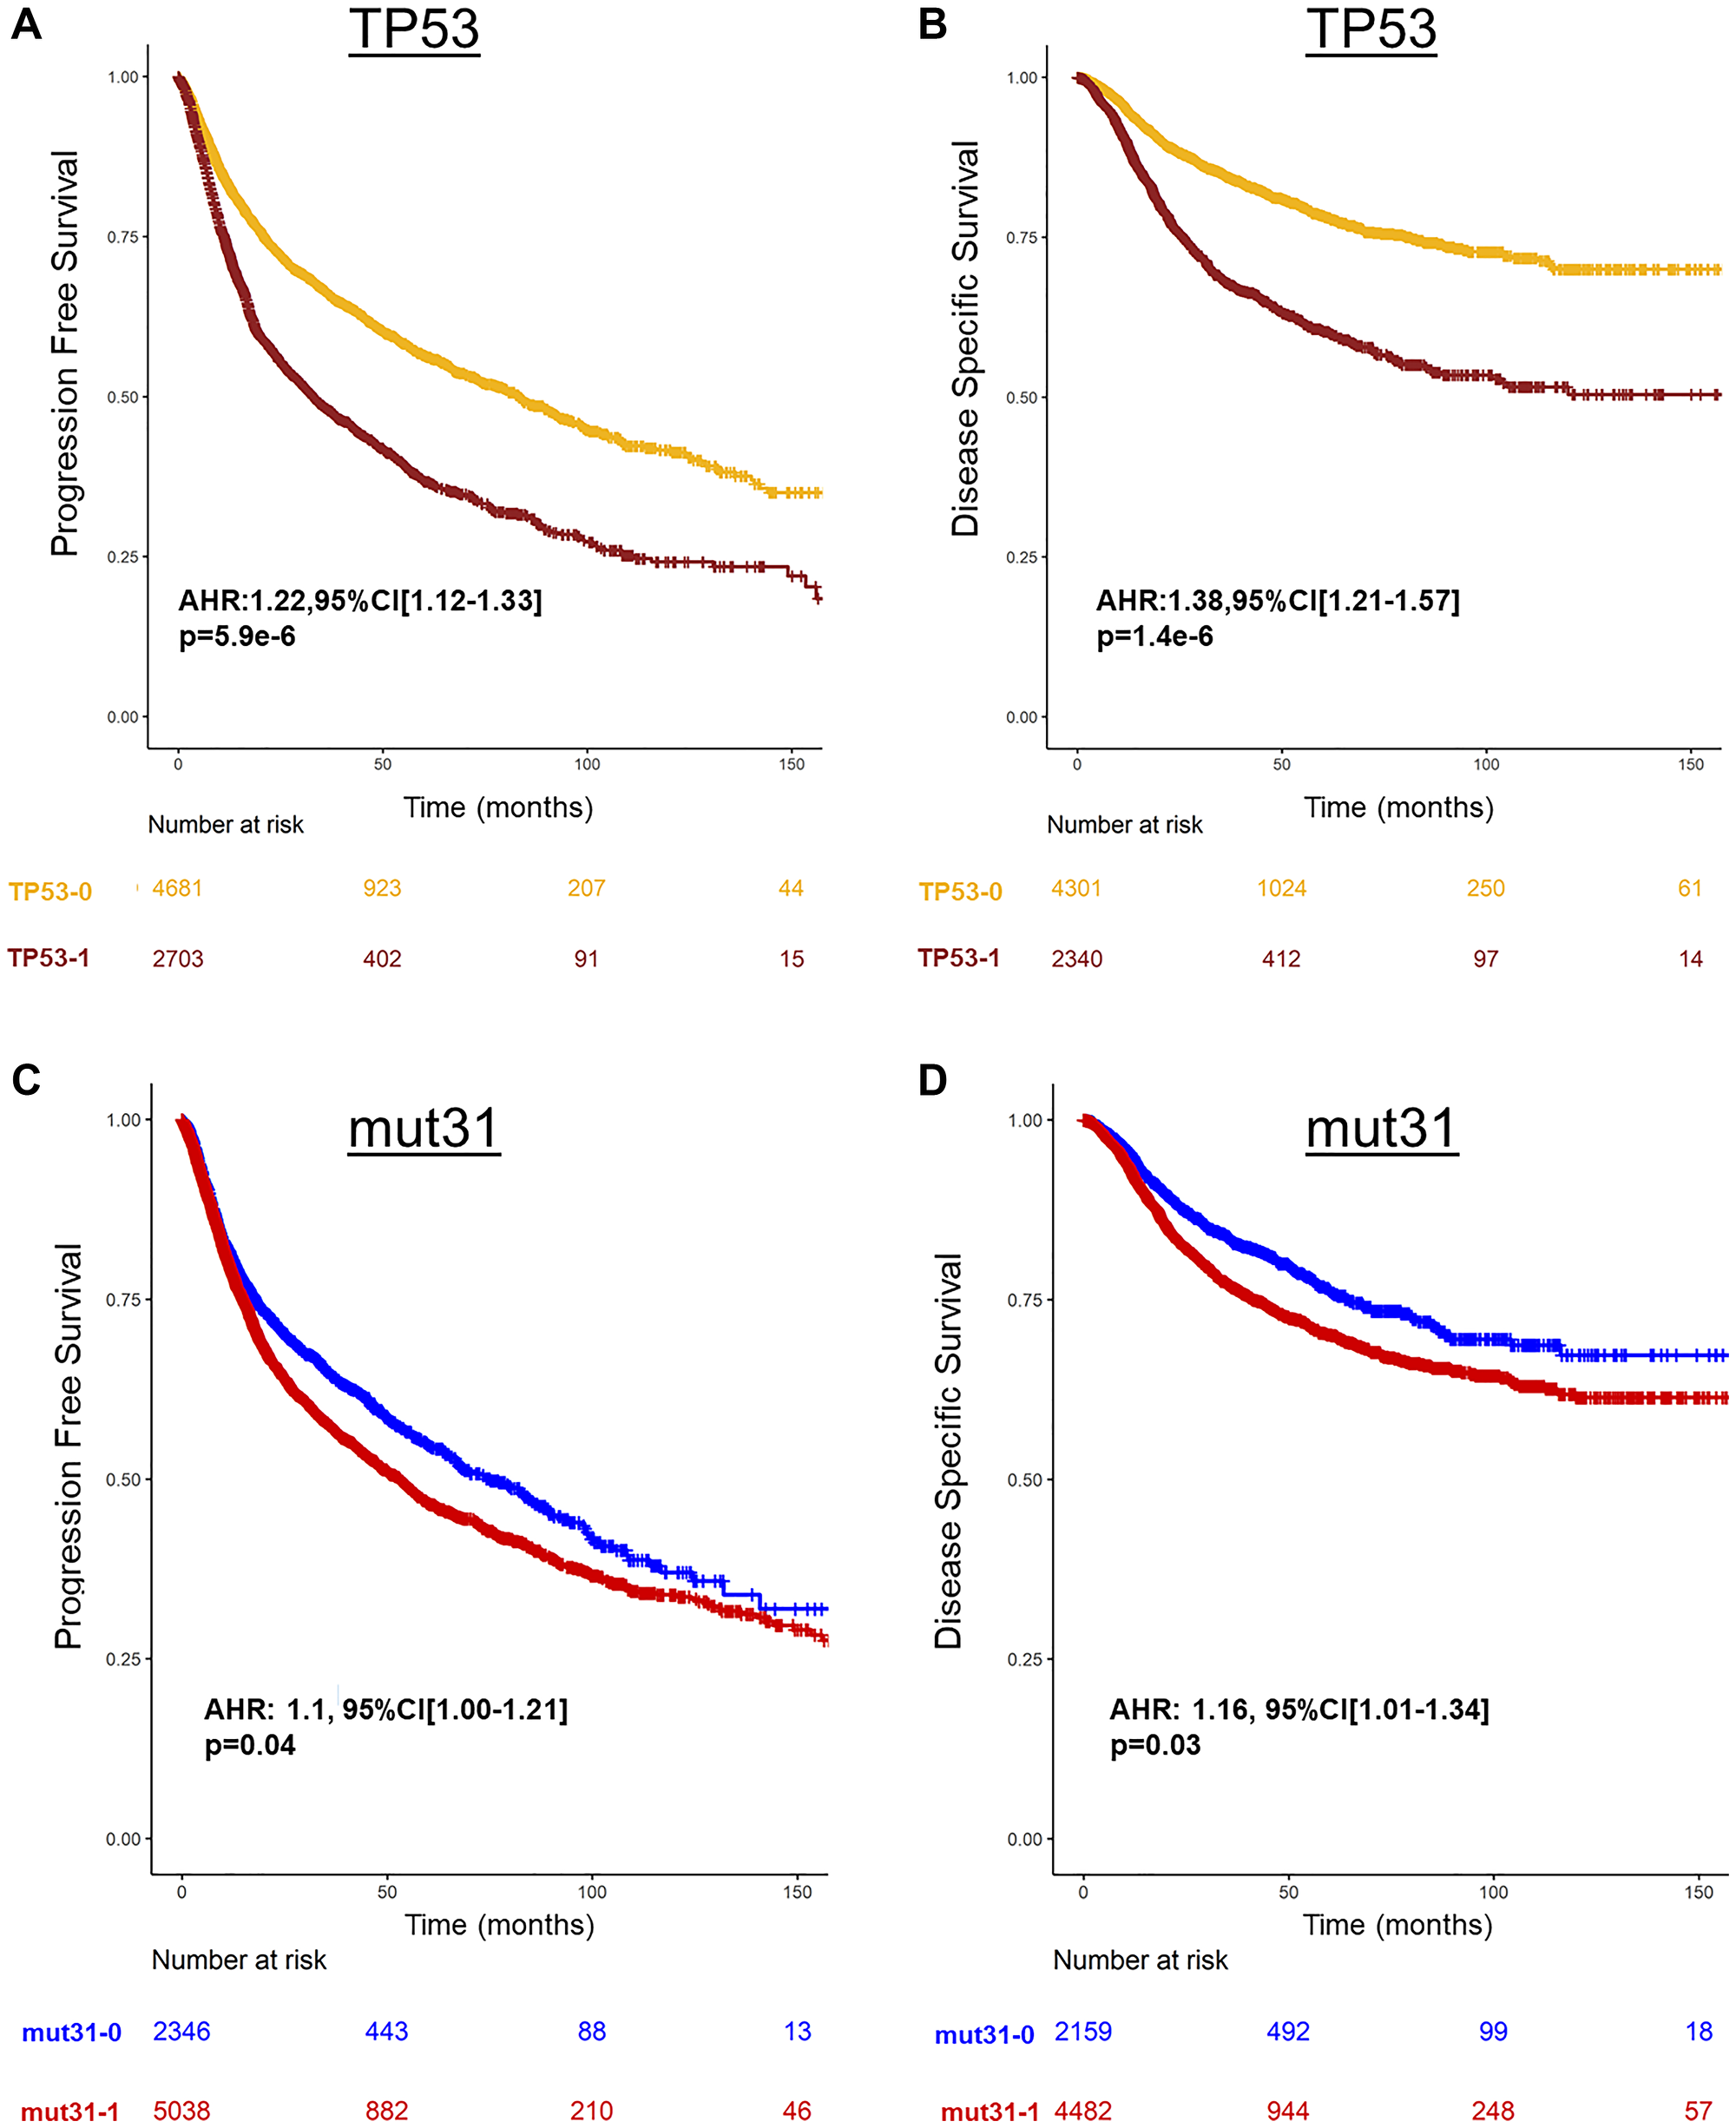 Prognosis of TP53 and mut31 in Pan-Cancer TCGA.